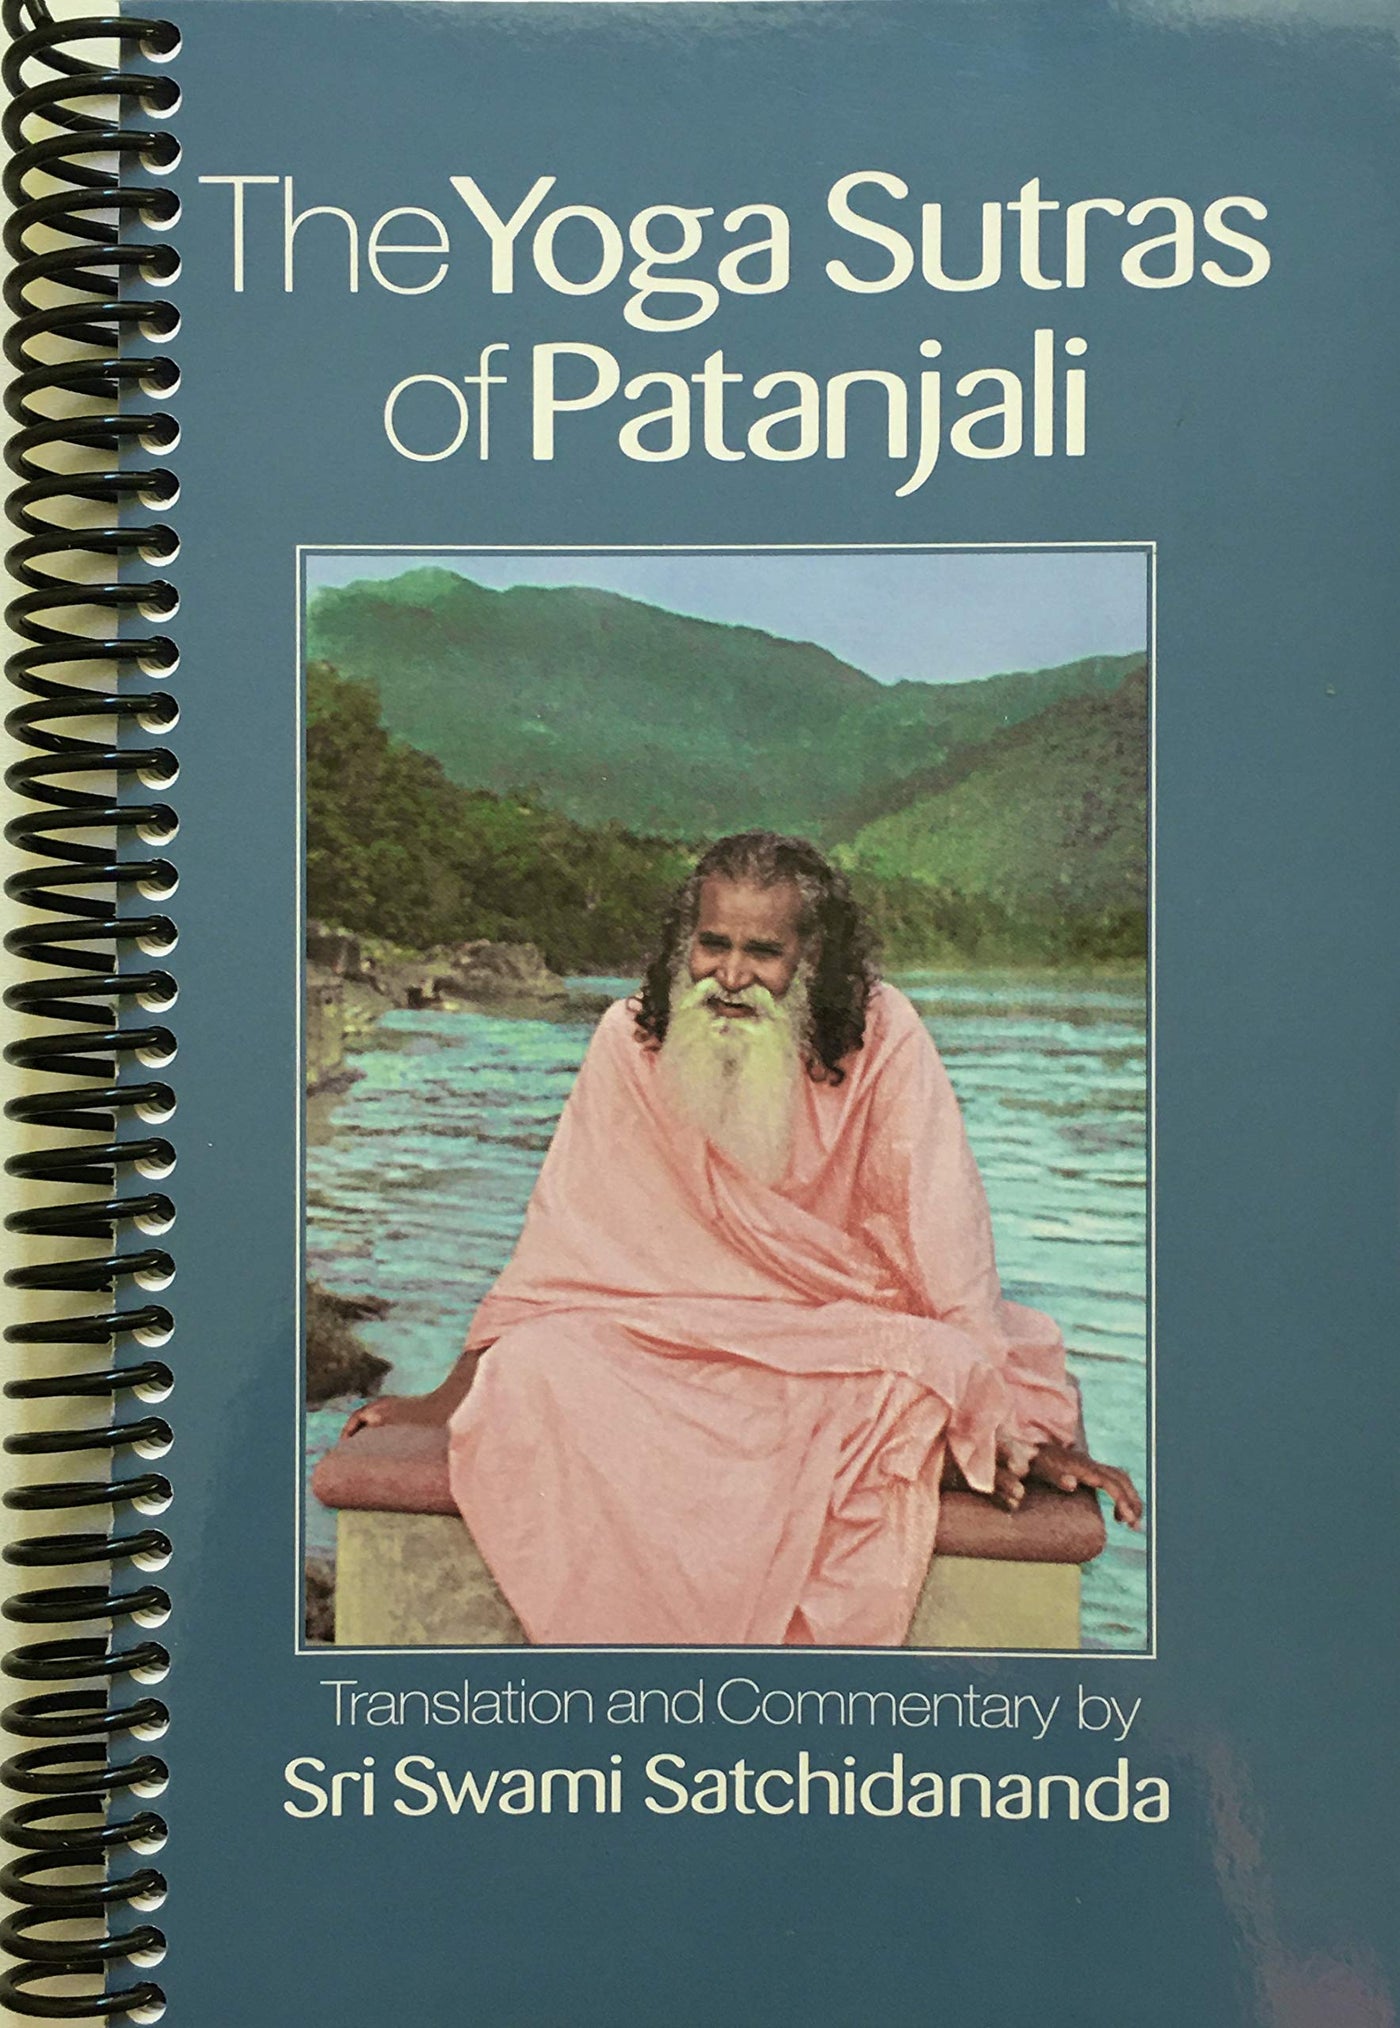 The Yoga Sutras of Patanjali (Spiral Bound)